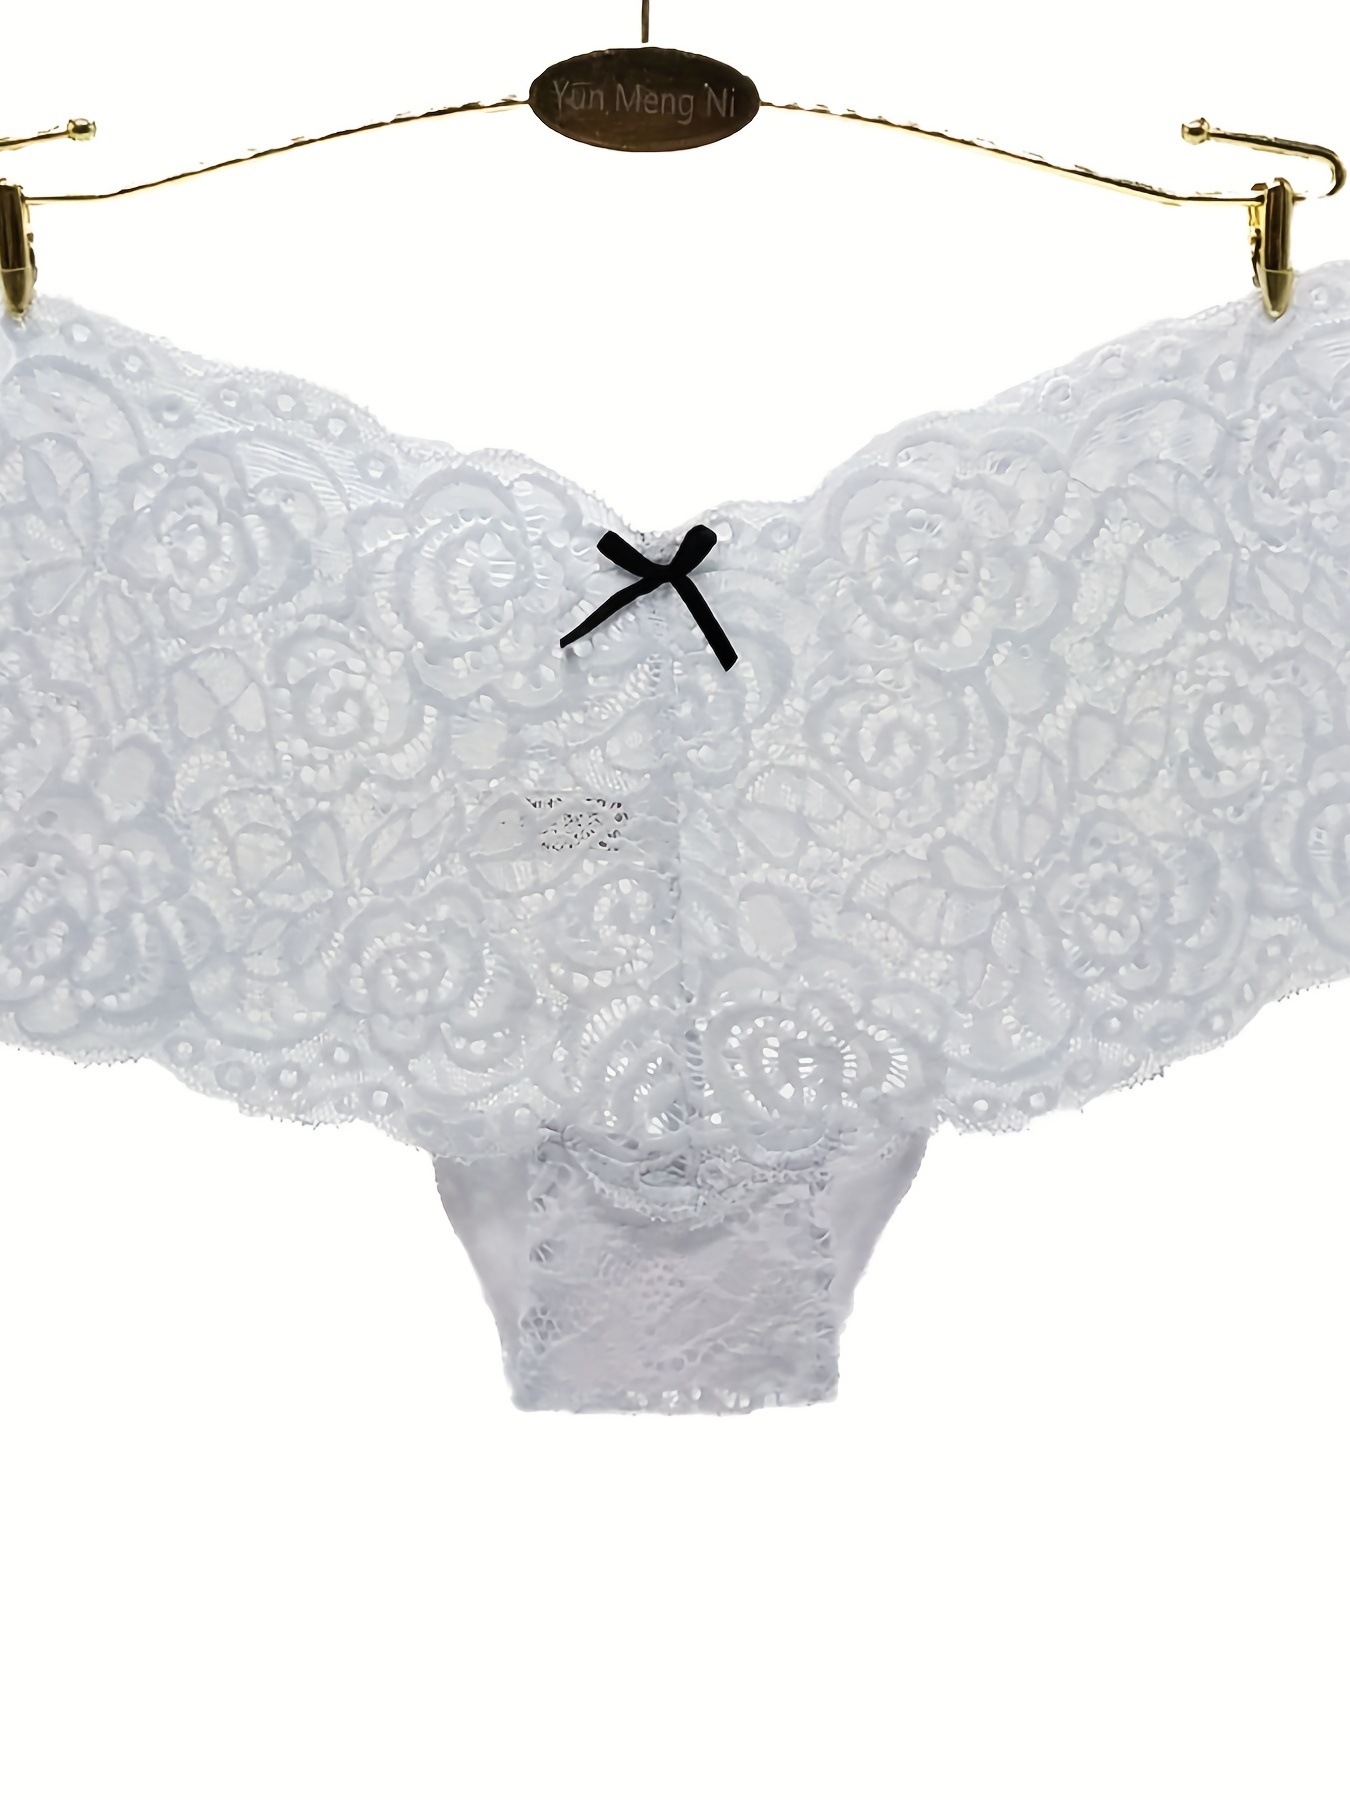 Contrast Lace Thongs Soft Comfy Scallop Trim Bow Tie Panties